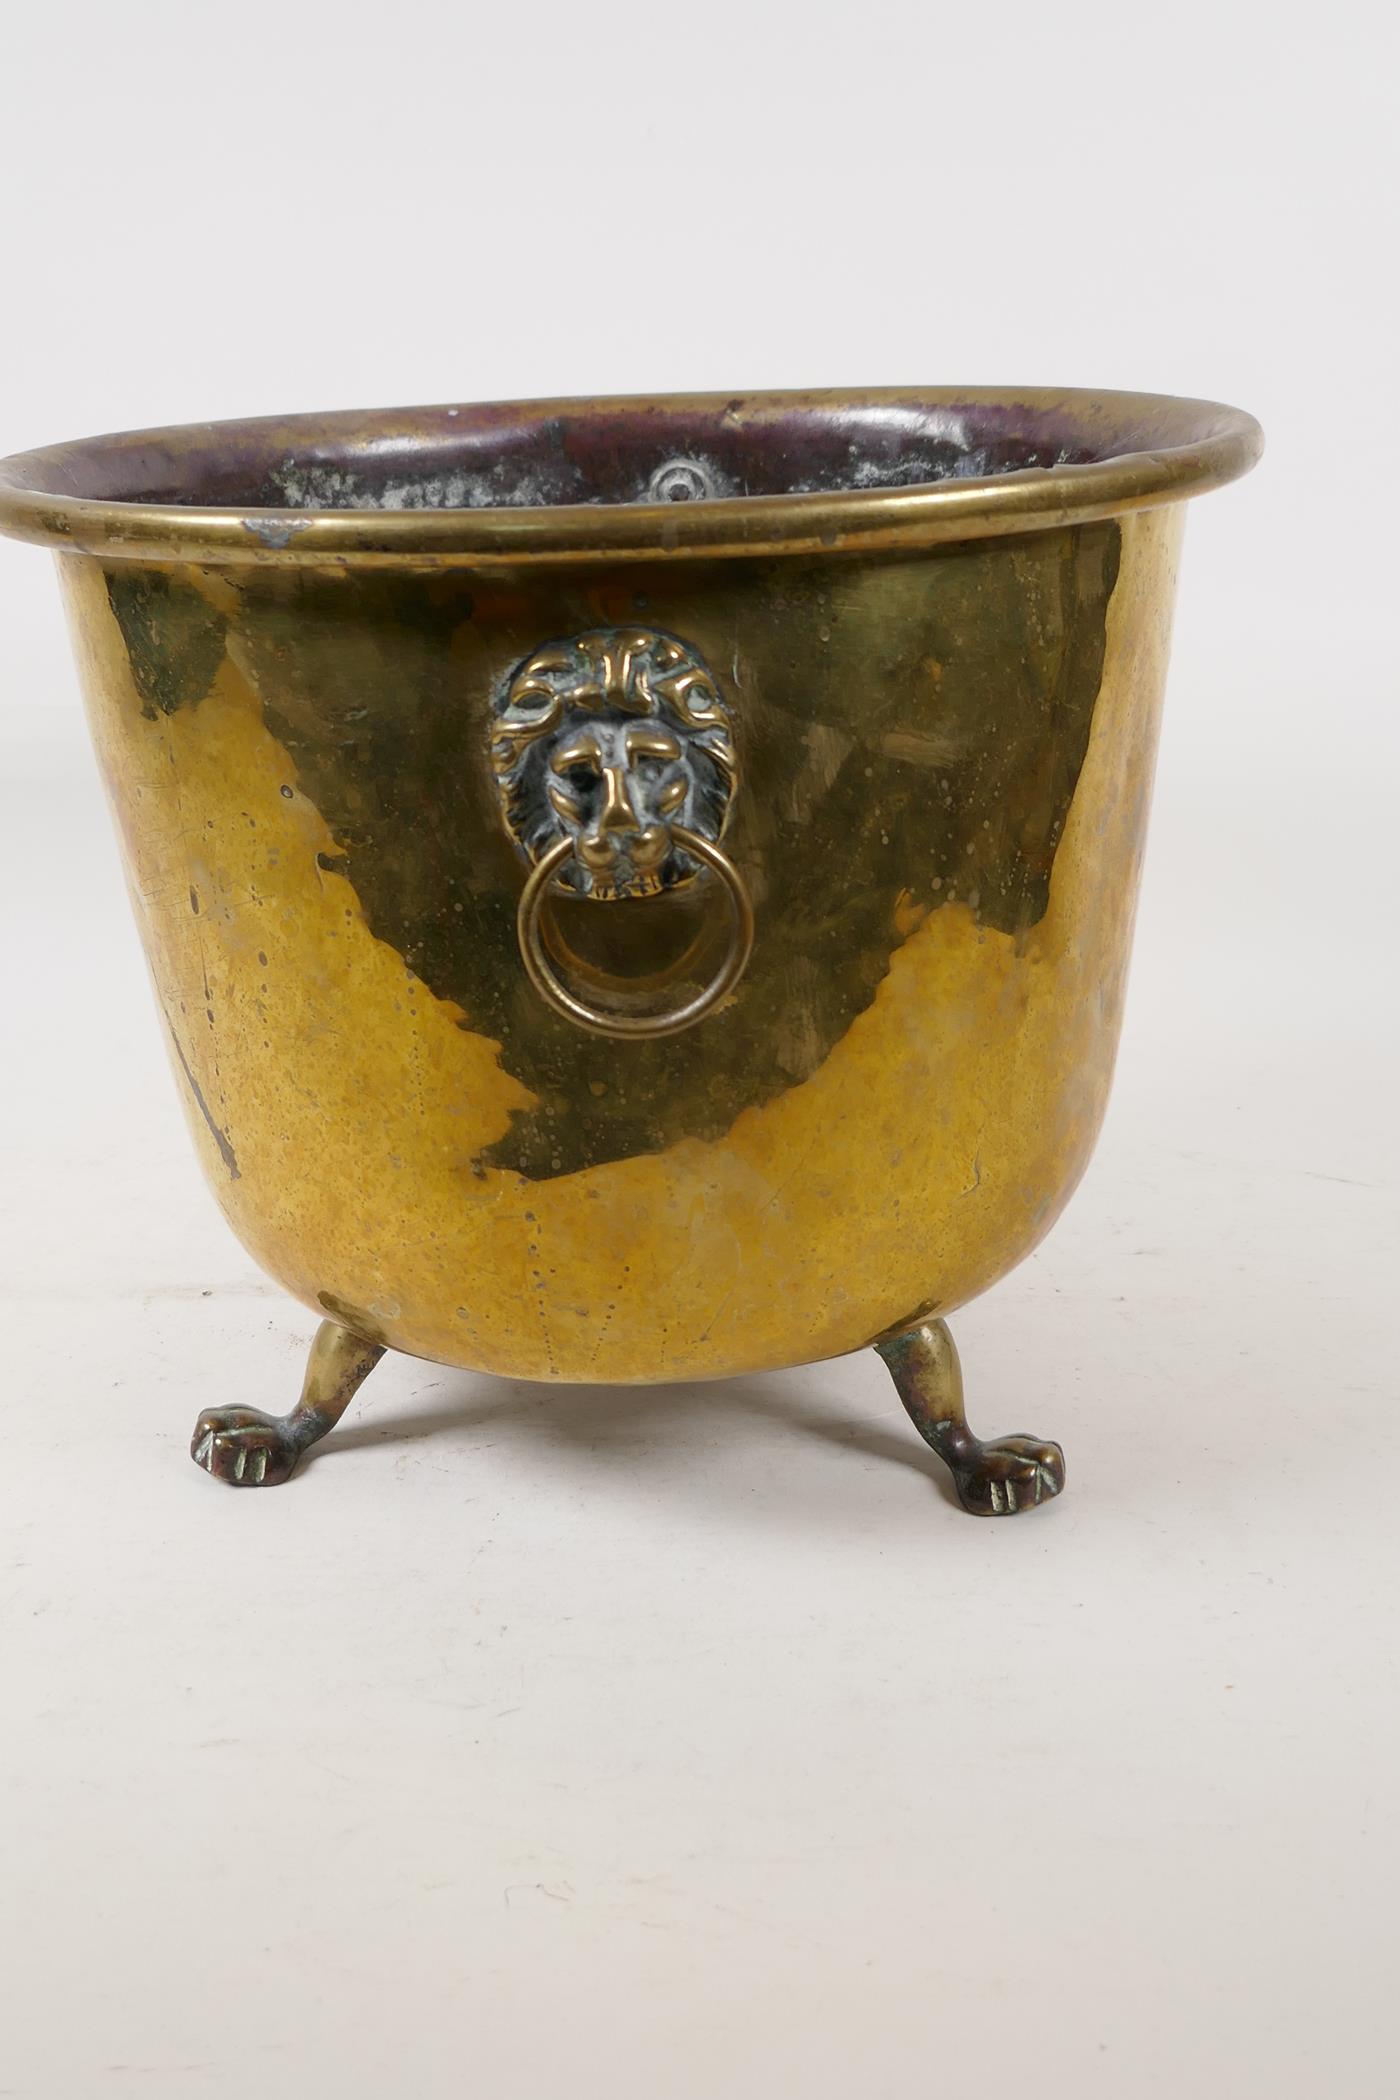 A C19th polished brass jardiniere with lion mask handles and three paw feet, 9" high - Image 2 of 4